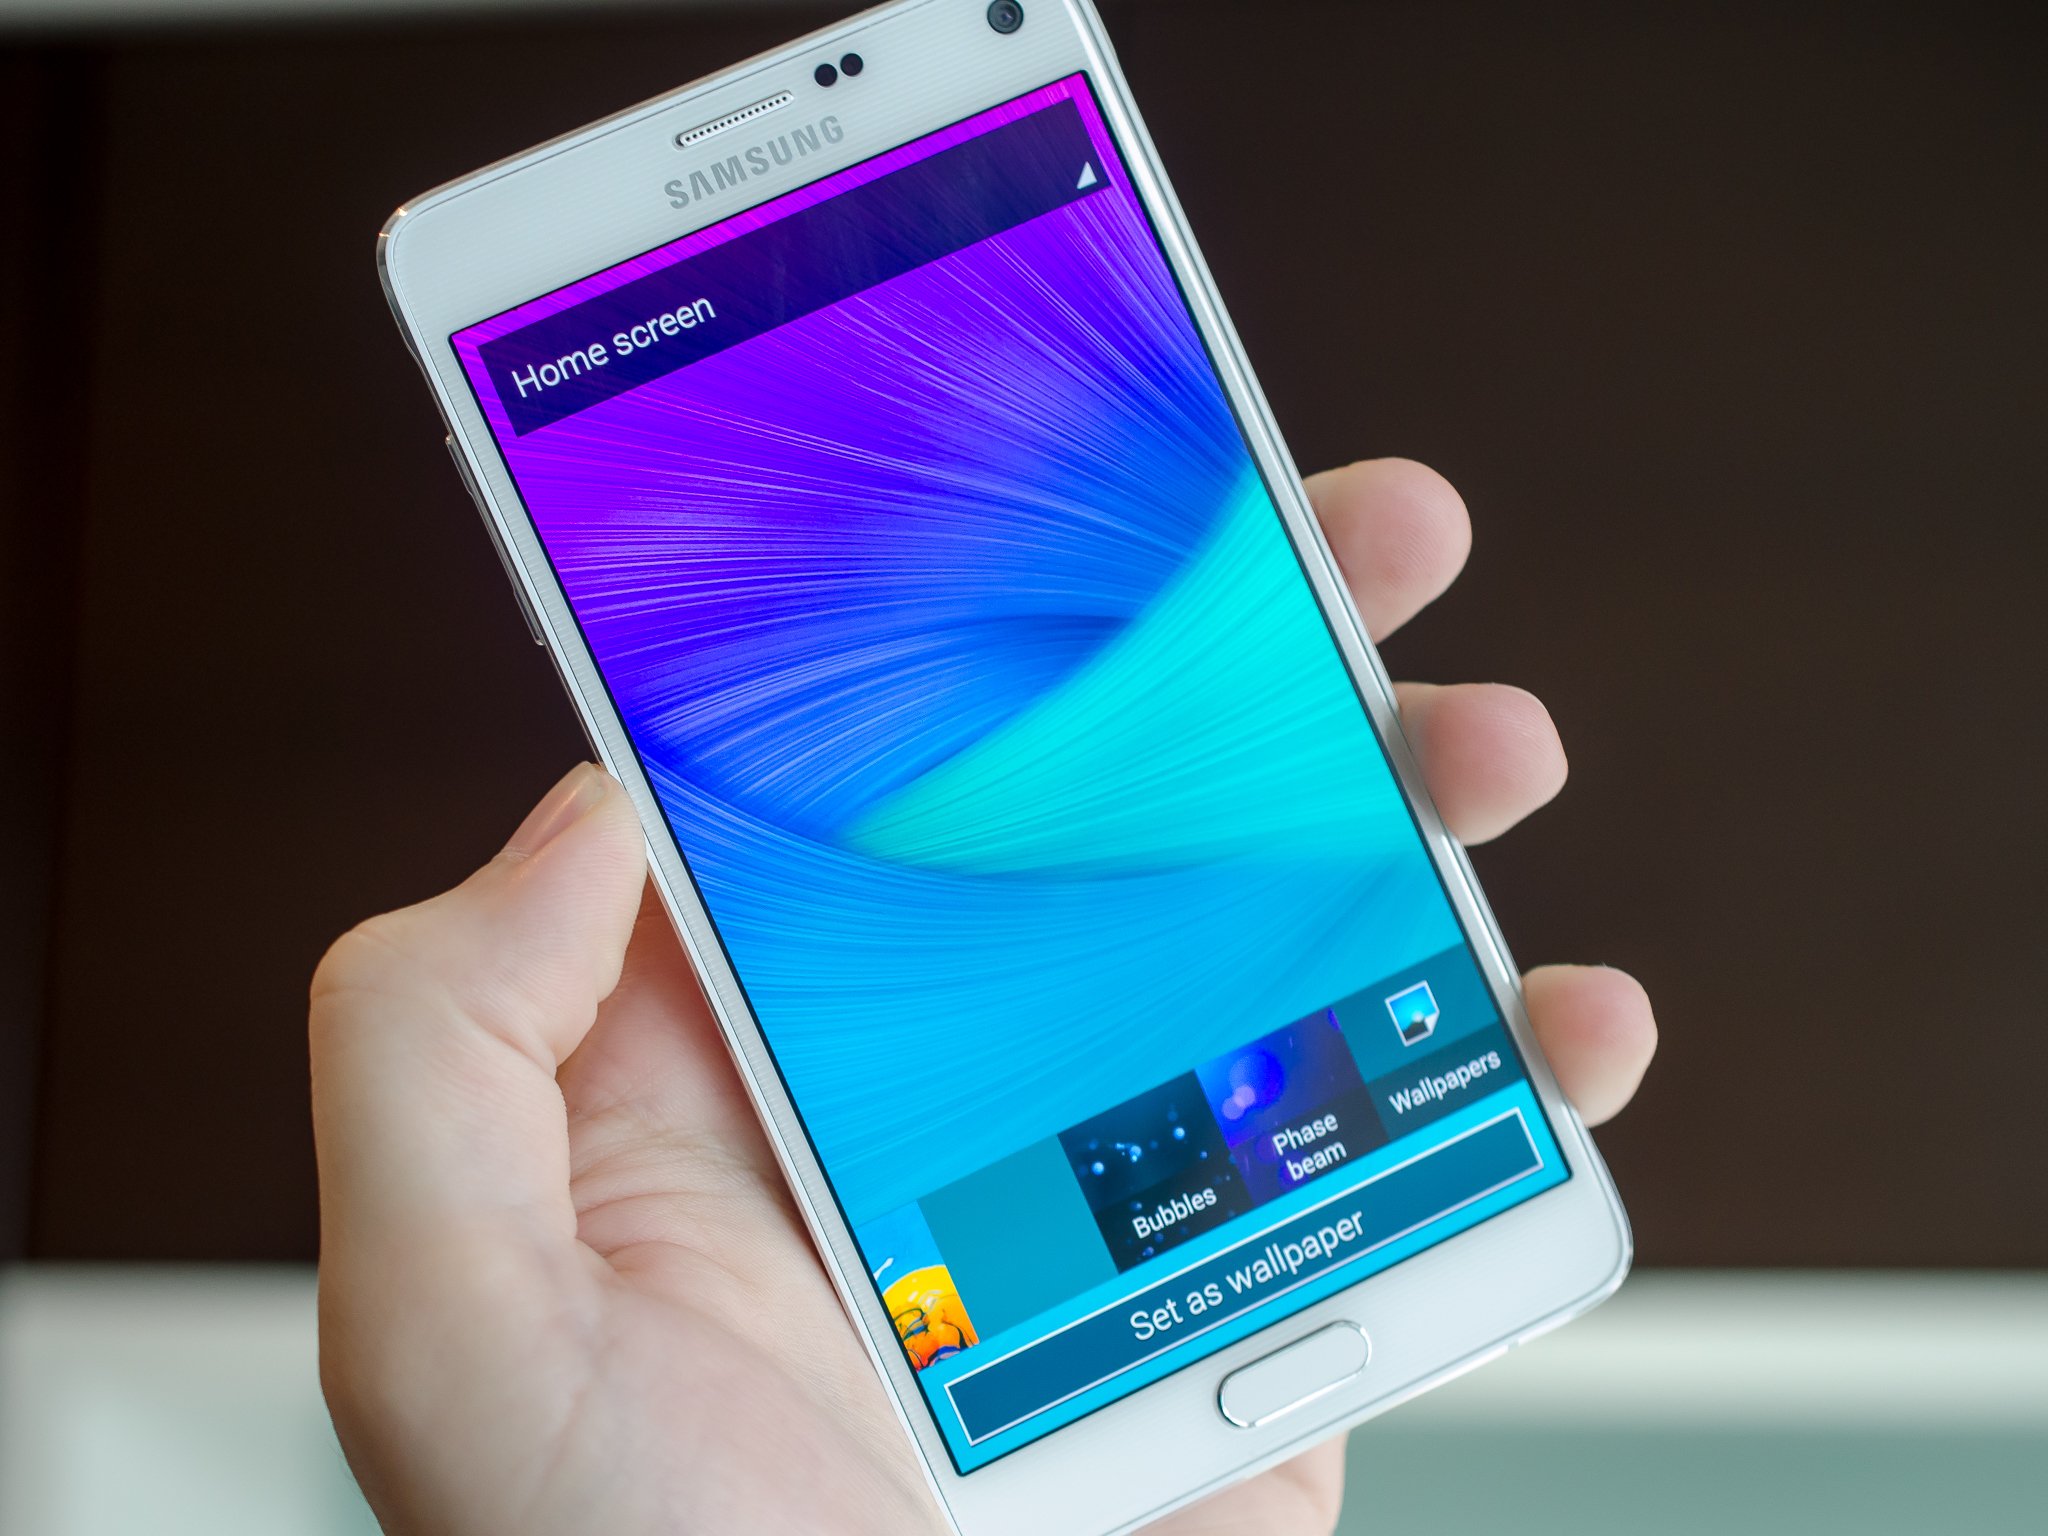 How To Change The Wallpaper On Your Galaxy Note 4 Android Central